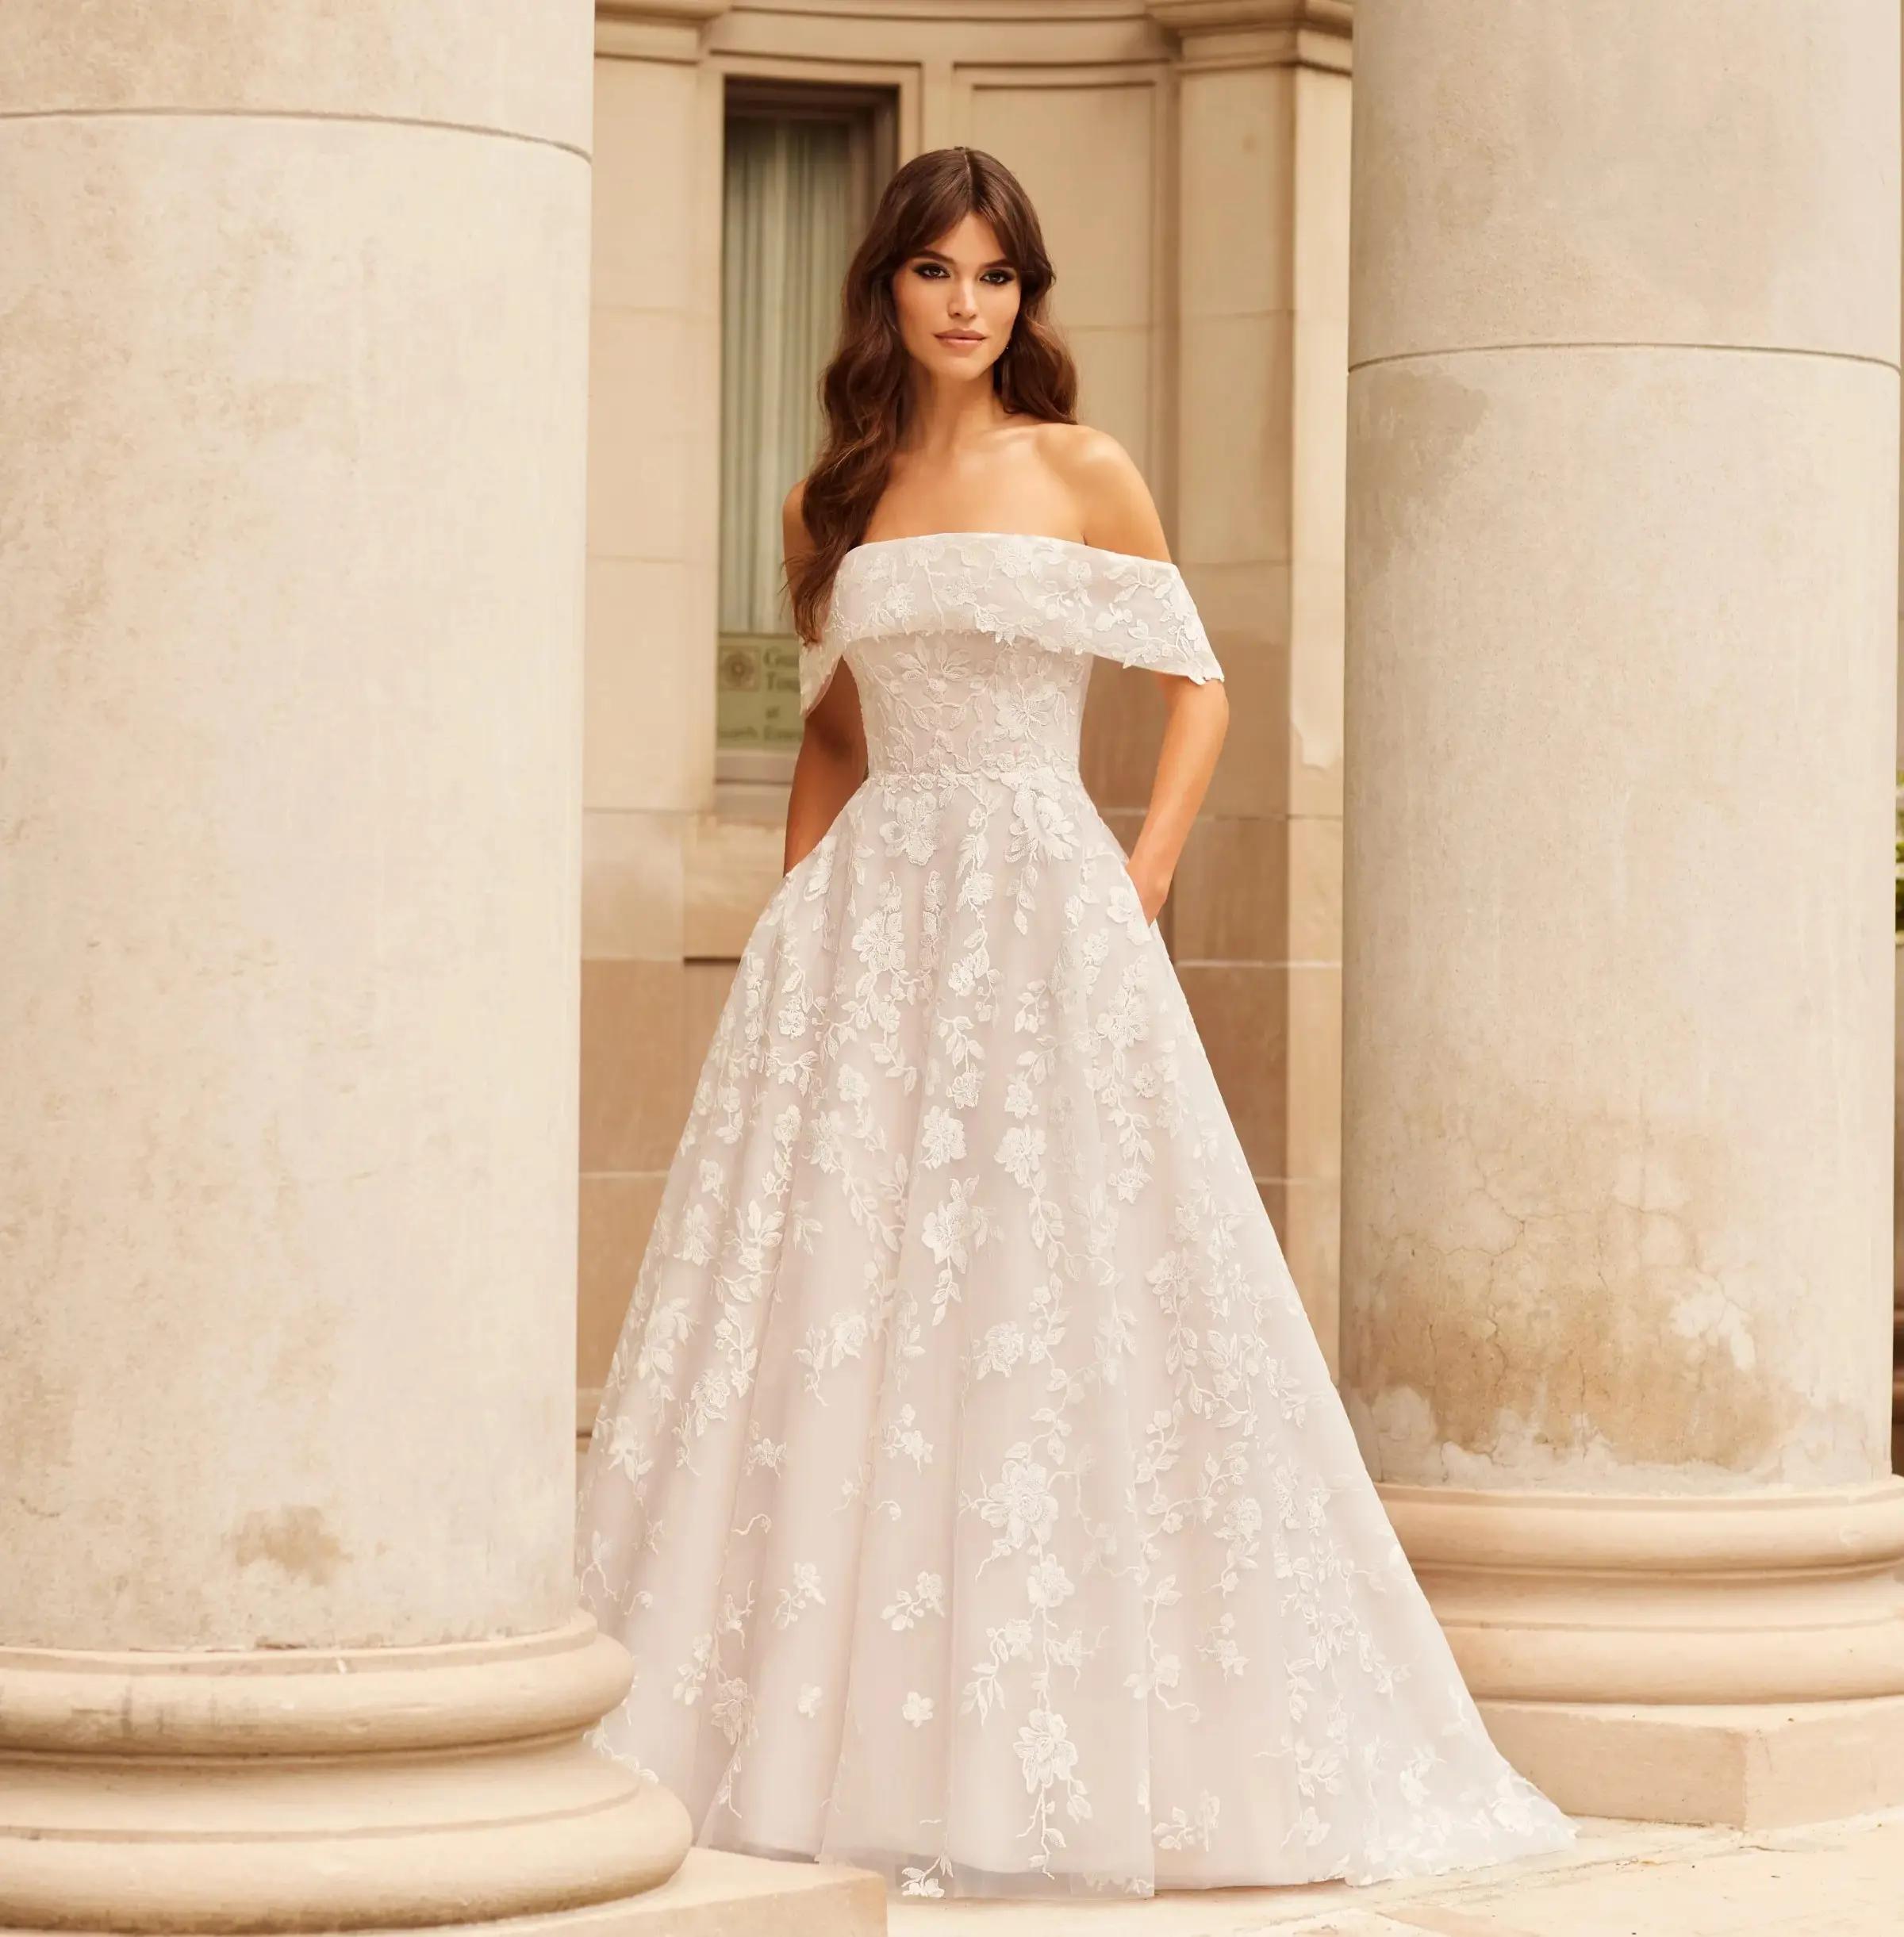 The Power Of The Lace: The Most Beautiful Wedding Dresses With Lace Image